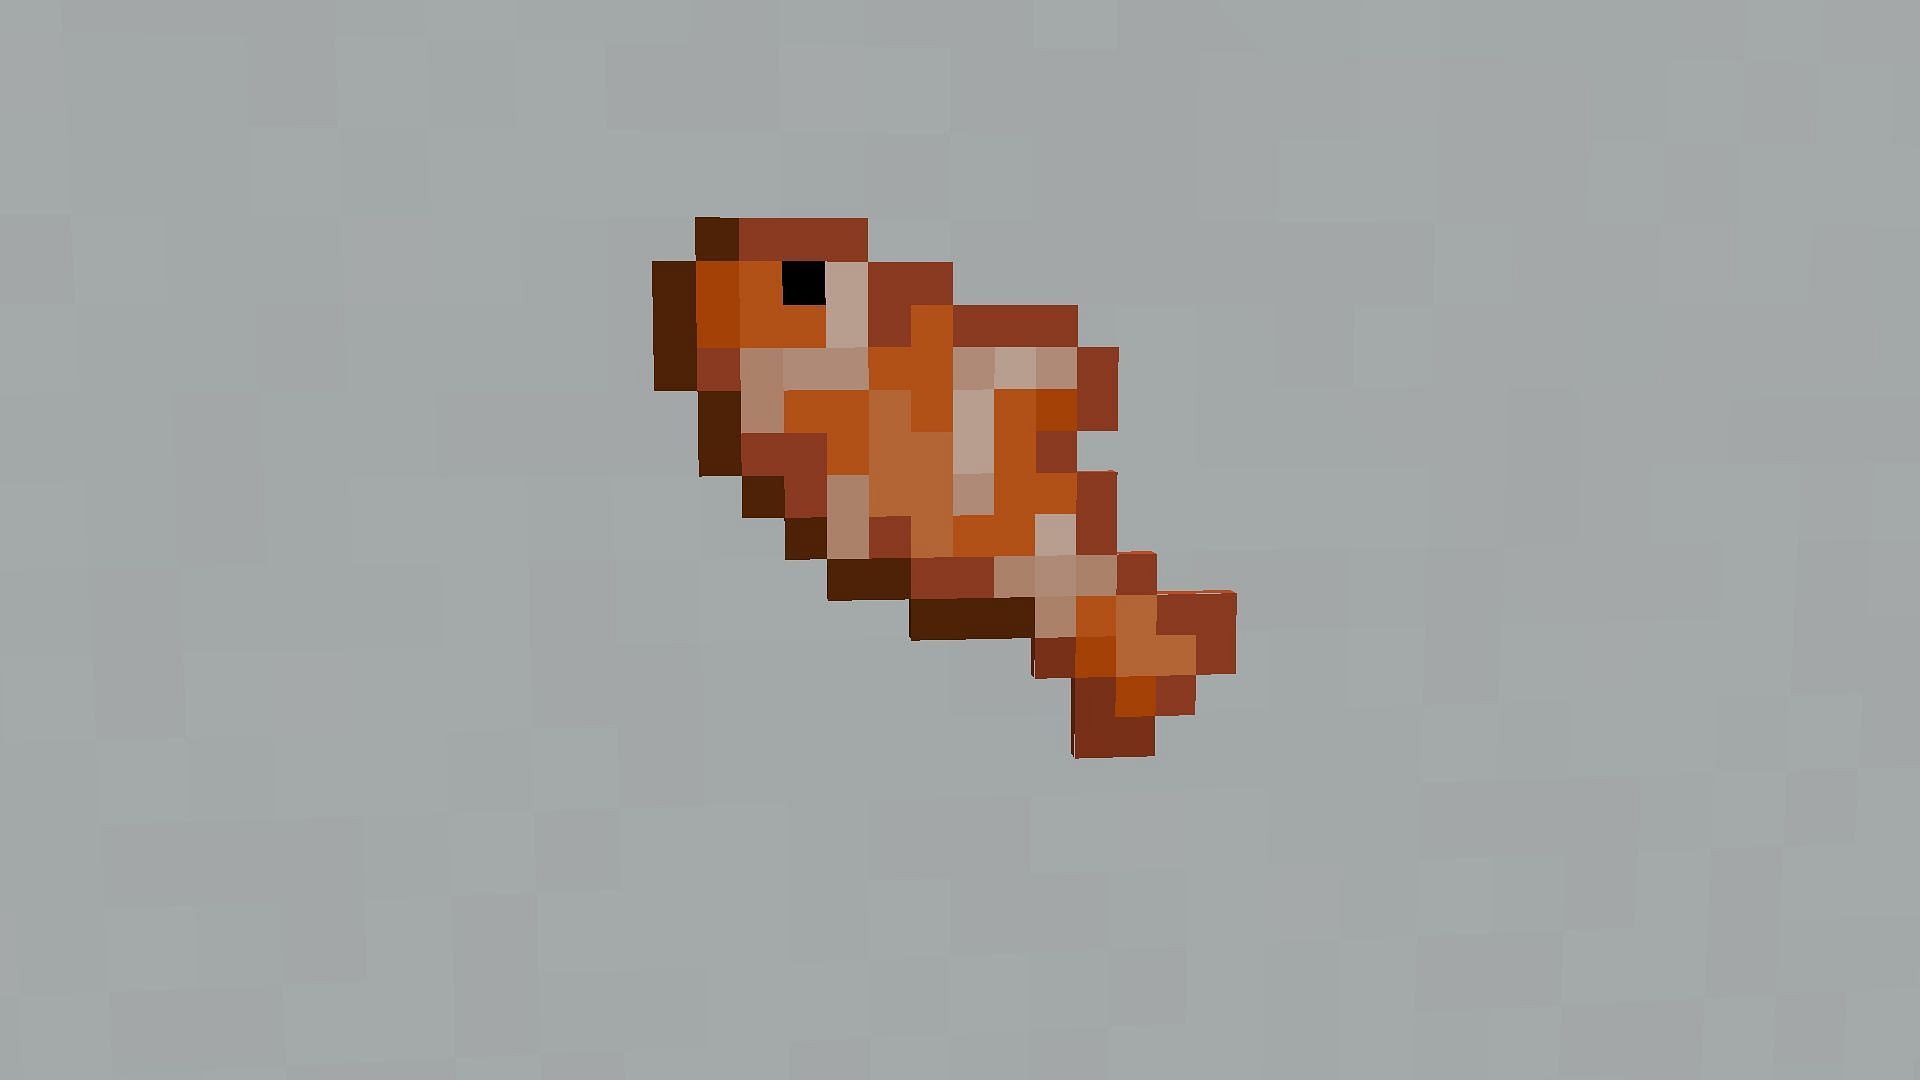 Tropical fish is one of the worst food items, but it does not apply any negative effect in Minecraft (Image via Mojang)